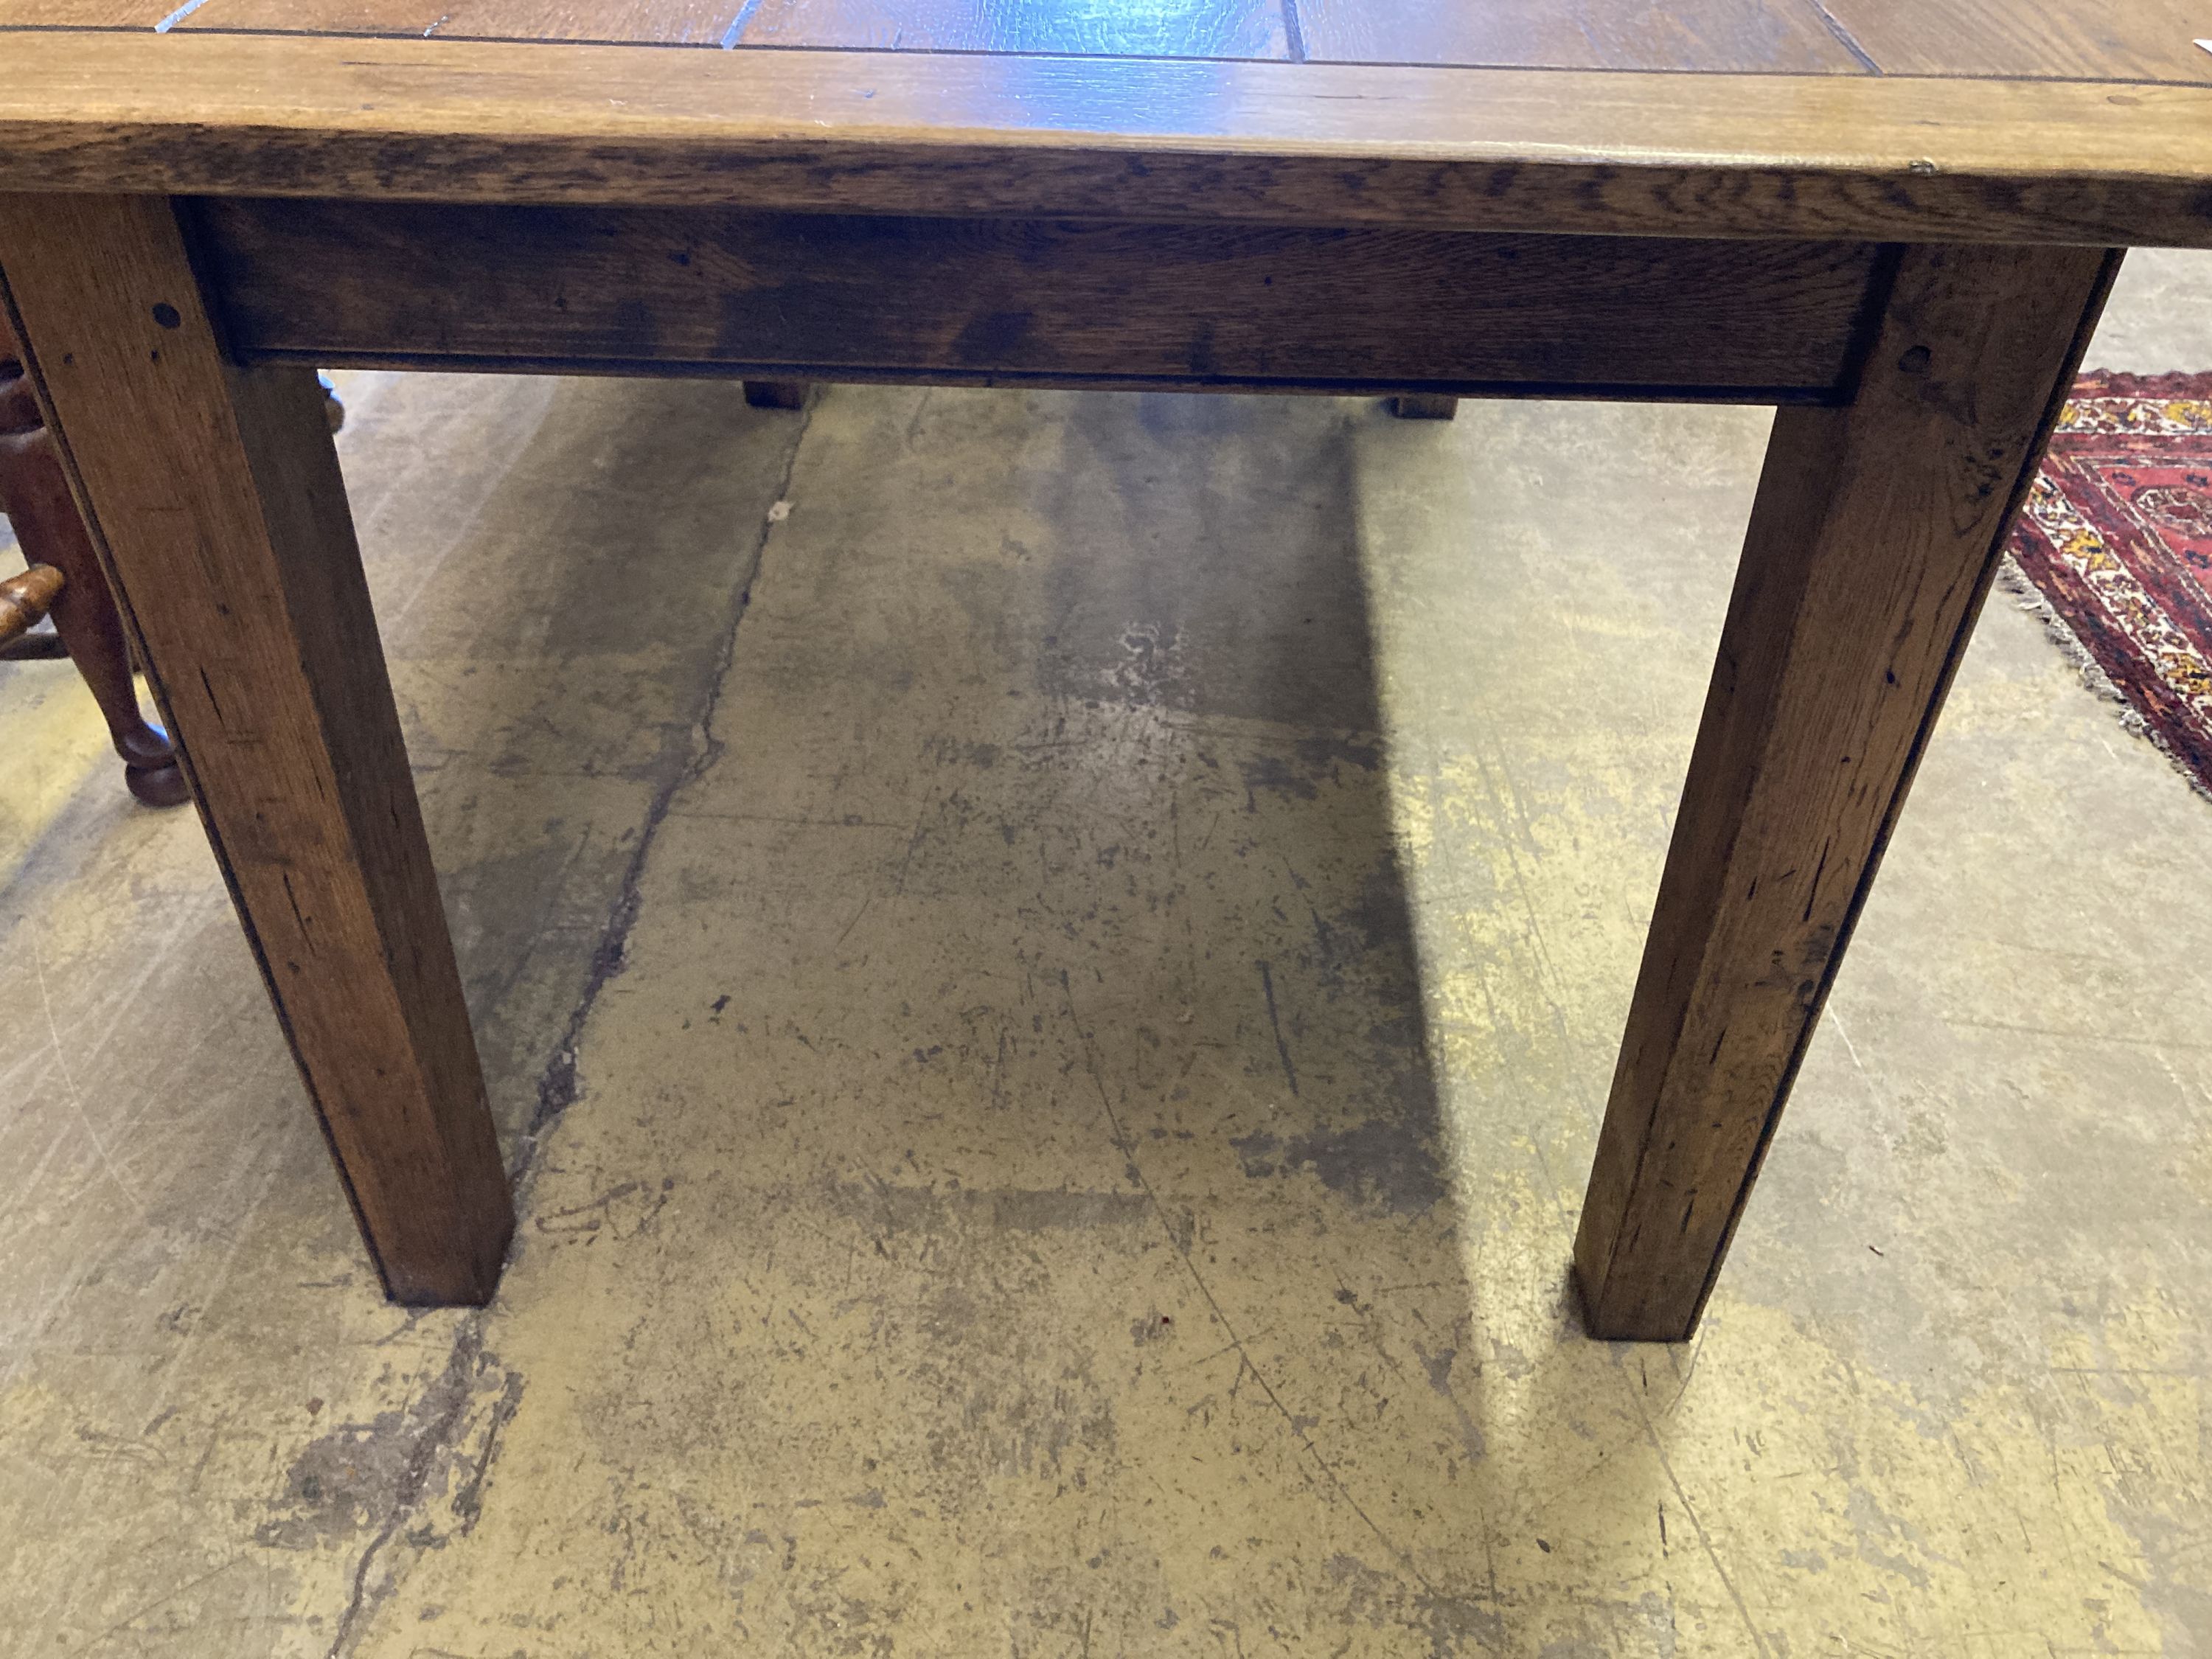 A 19th century style rectangular oak dining table with planked top, length 153cm, depth 90cm, height 77cm